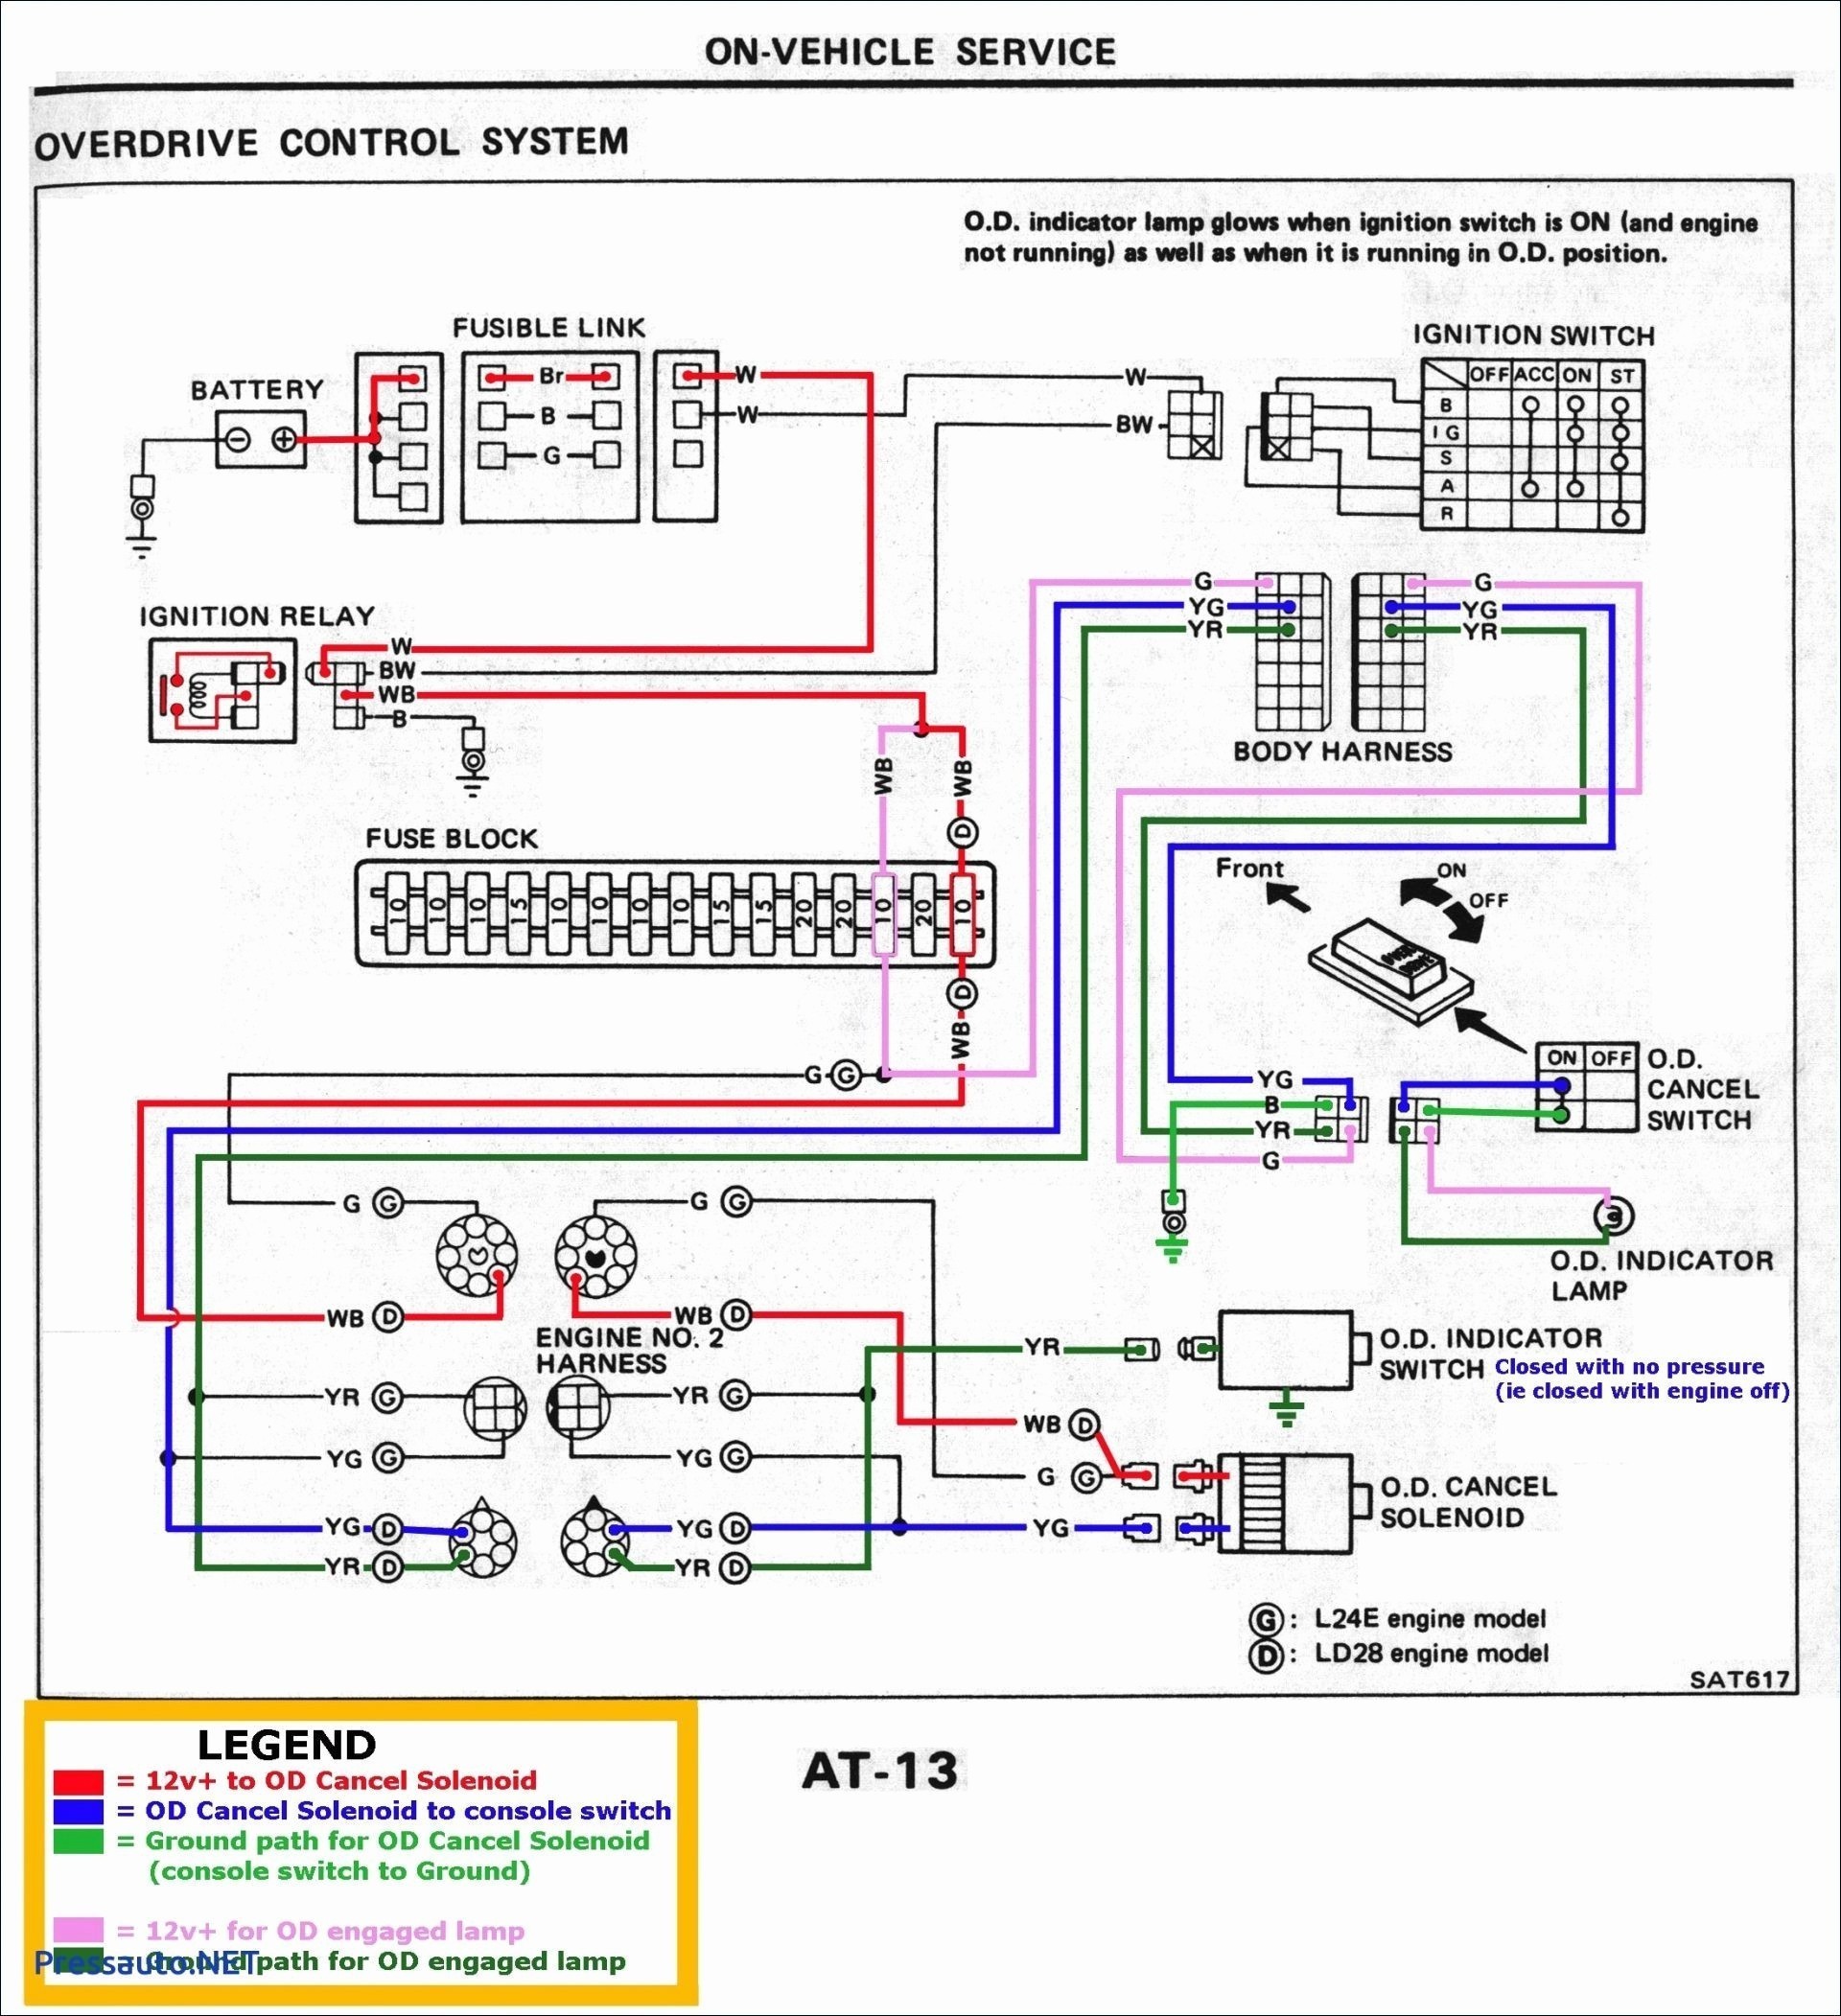 Buick Rendezvous Engine Diagram House Wiring Diagram Examples Refrence for Interposing Relay New Of Buick Rendezvous Engine Diagram